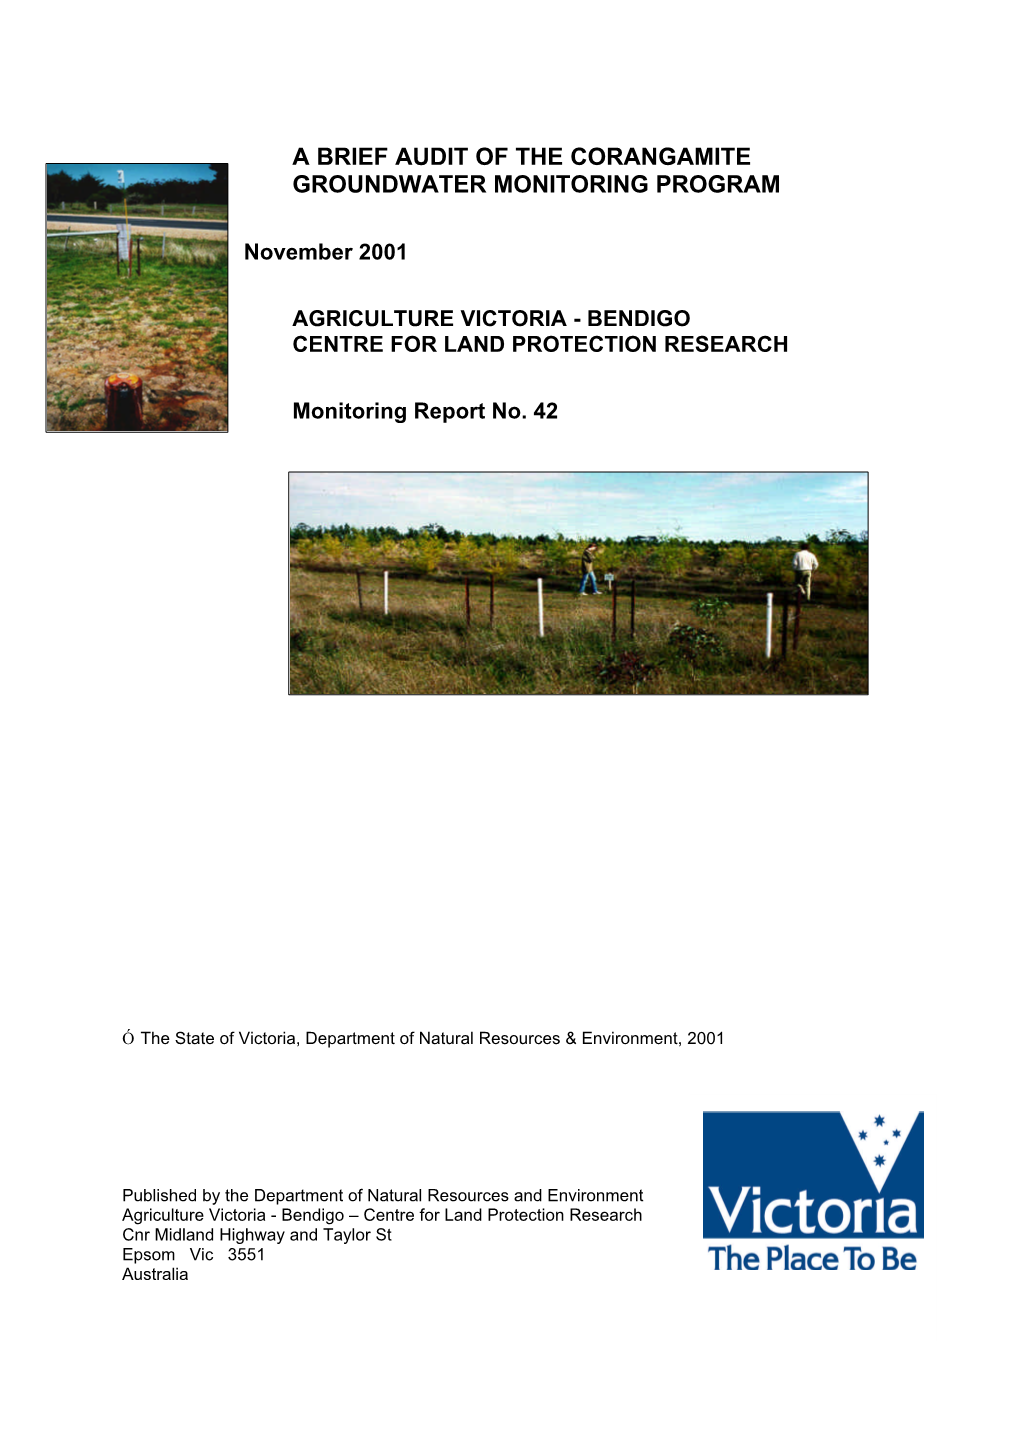 A Brief Audit of the Corangamite Groundwater Monitoring Program